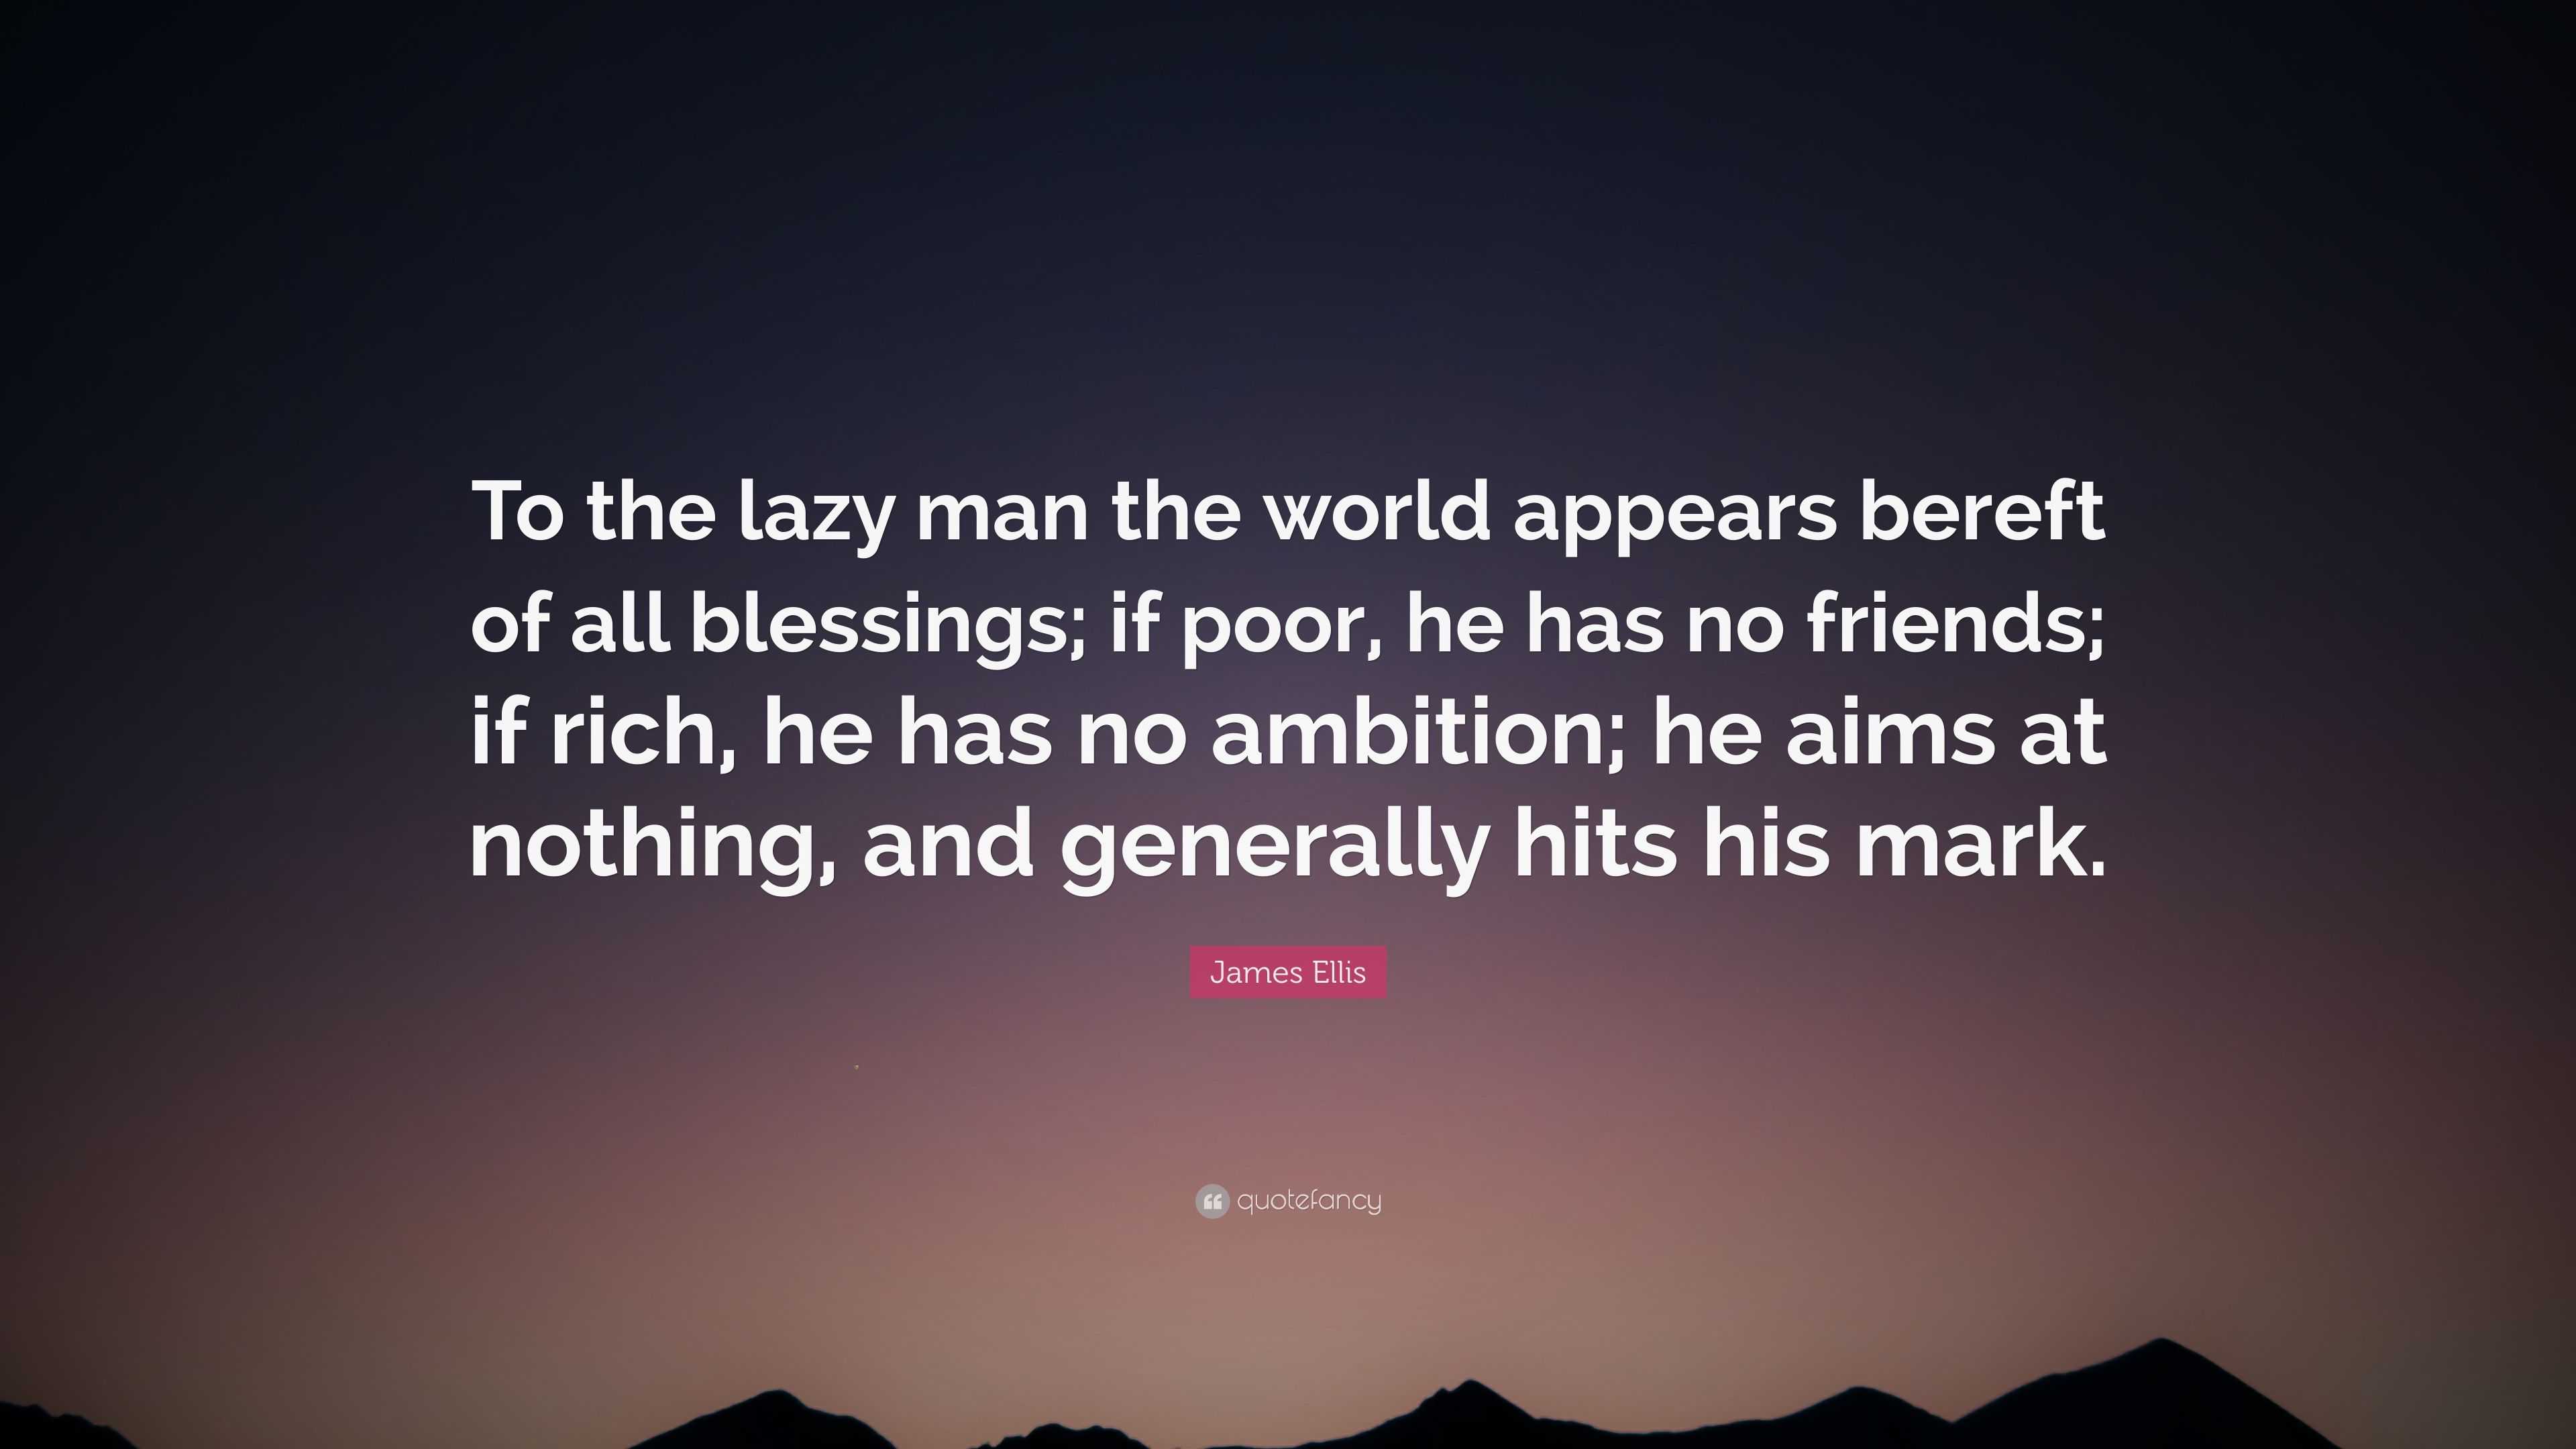 James Ellis Quote To The Lazy Man The World Appears Bereft Of All Blessings If Poor He Has No Friends If Rich He Has No Ambition He A